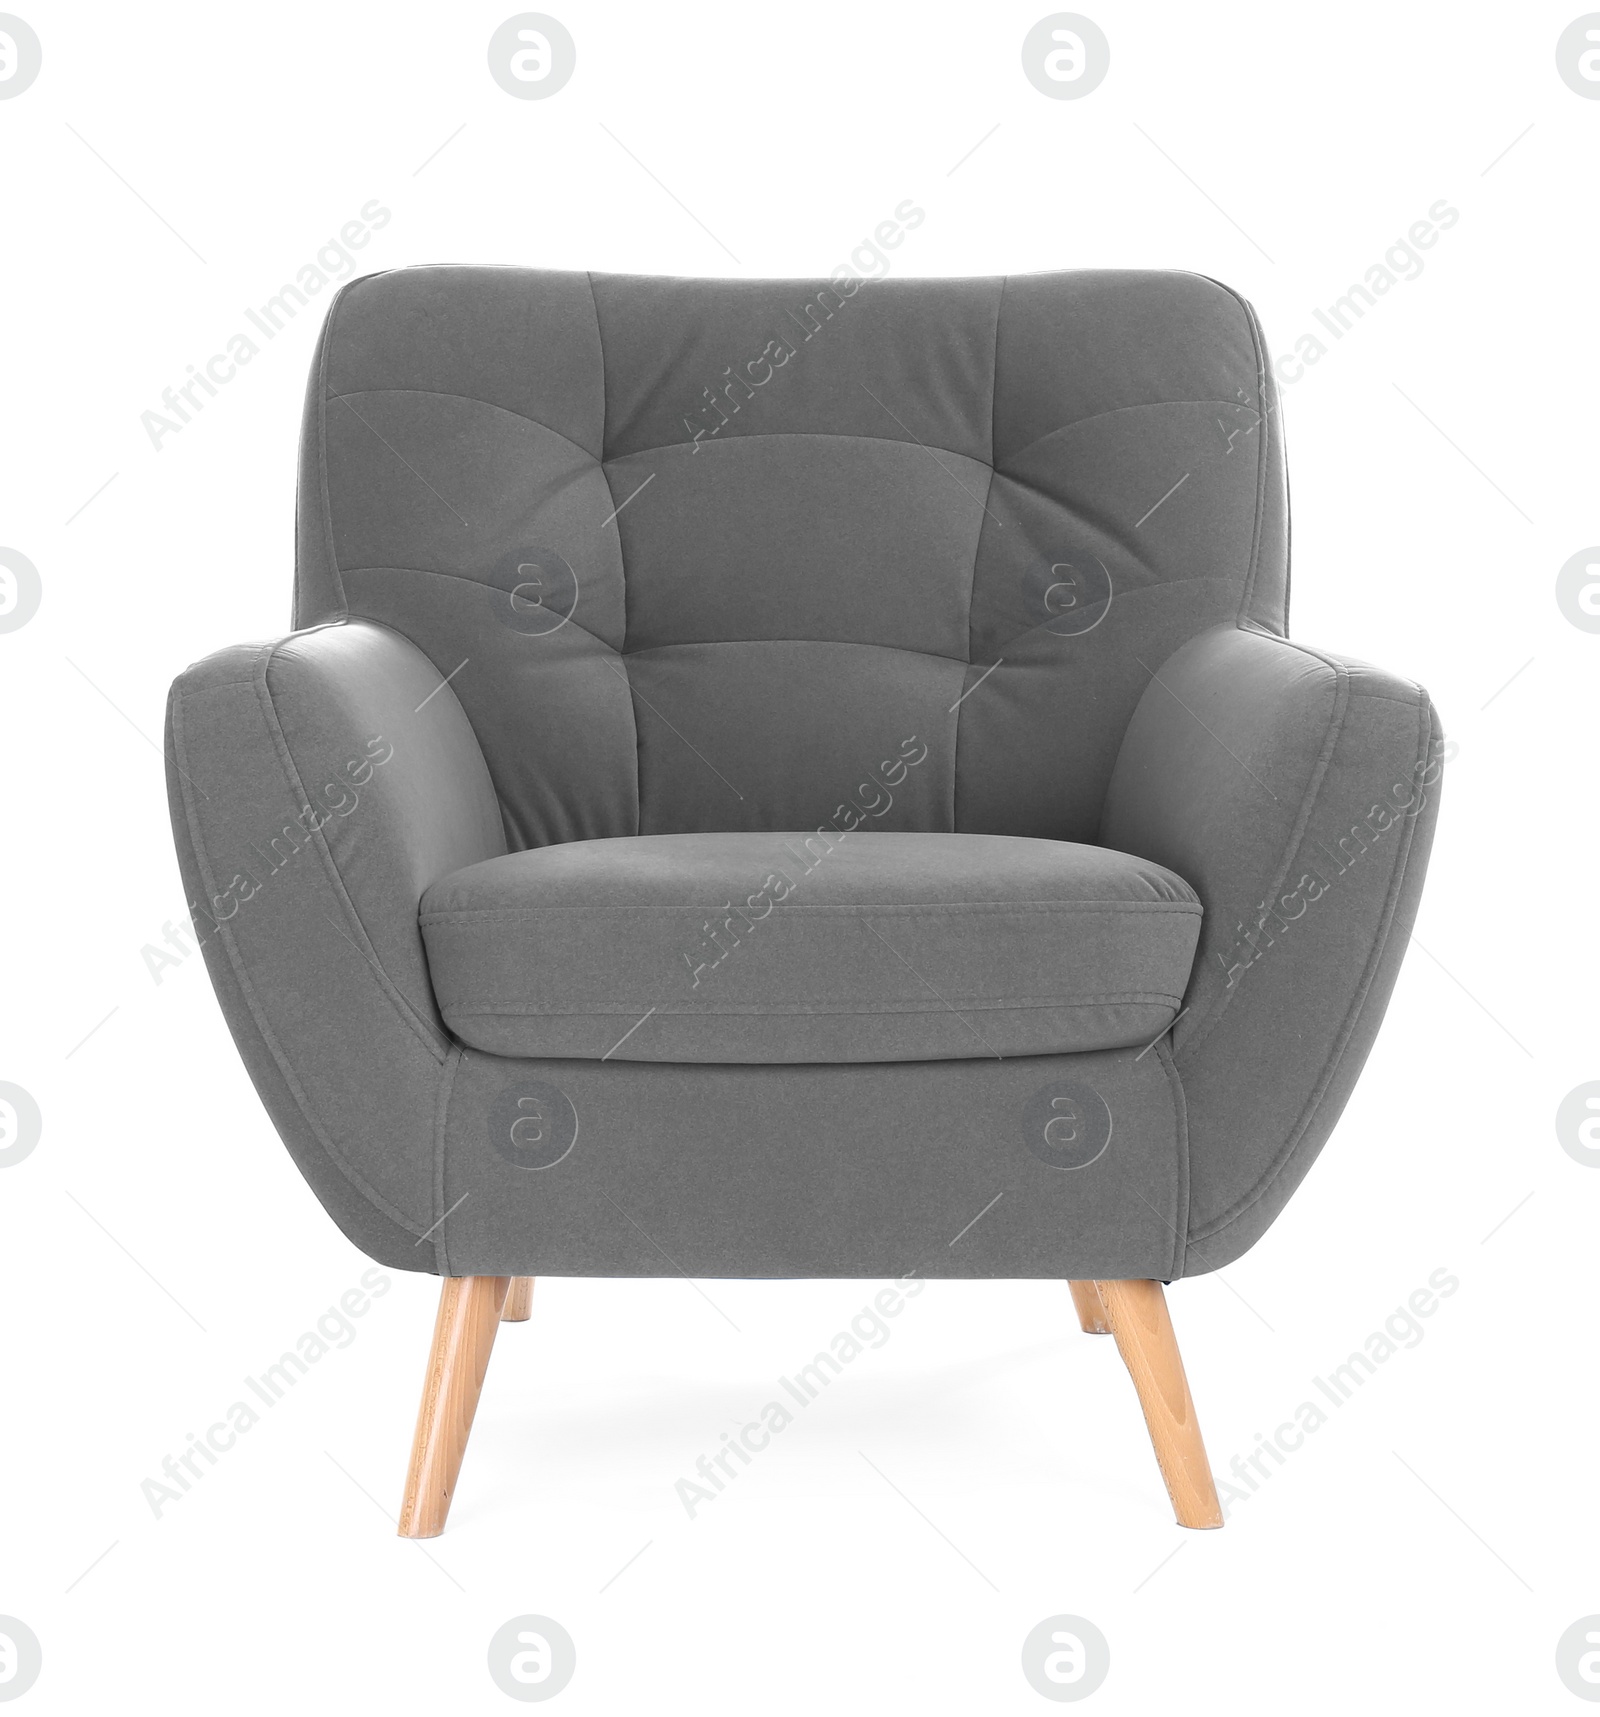 Image of One comfortable grey armchair isolated on white